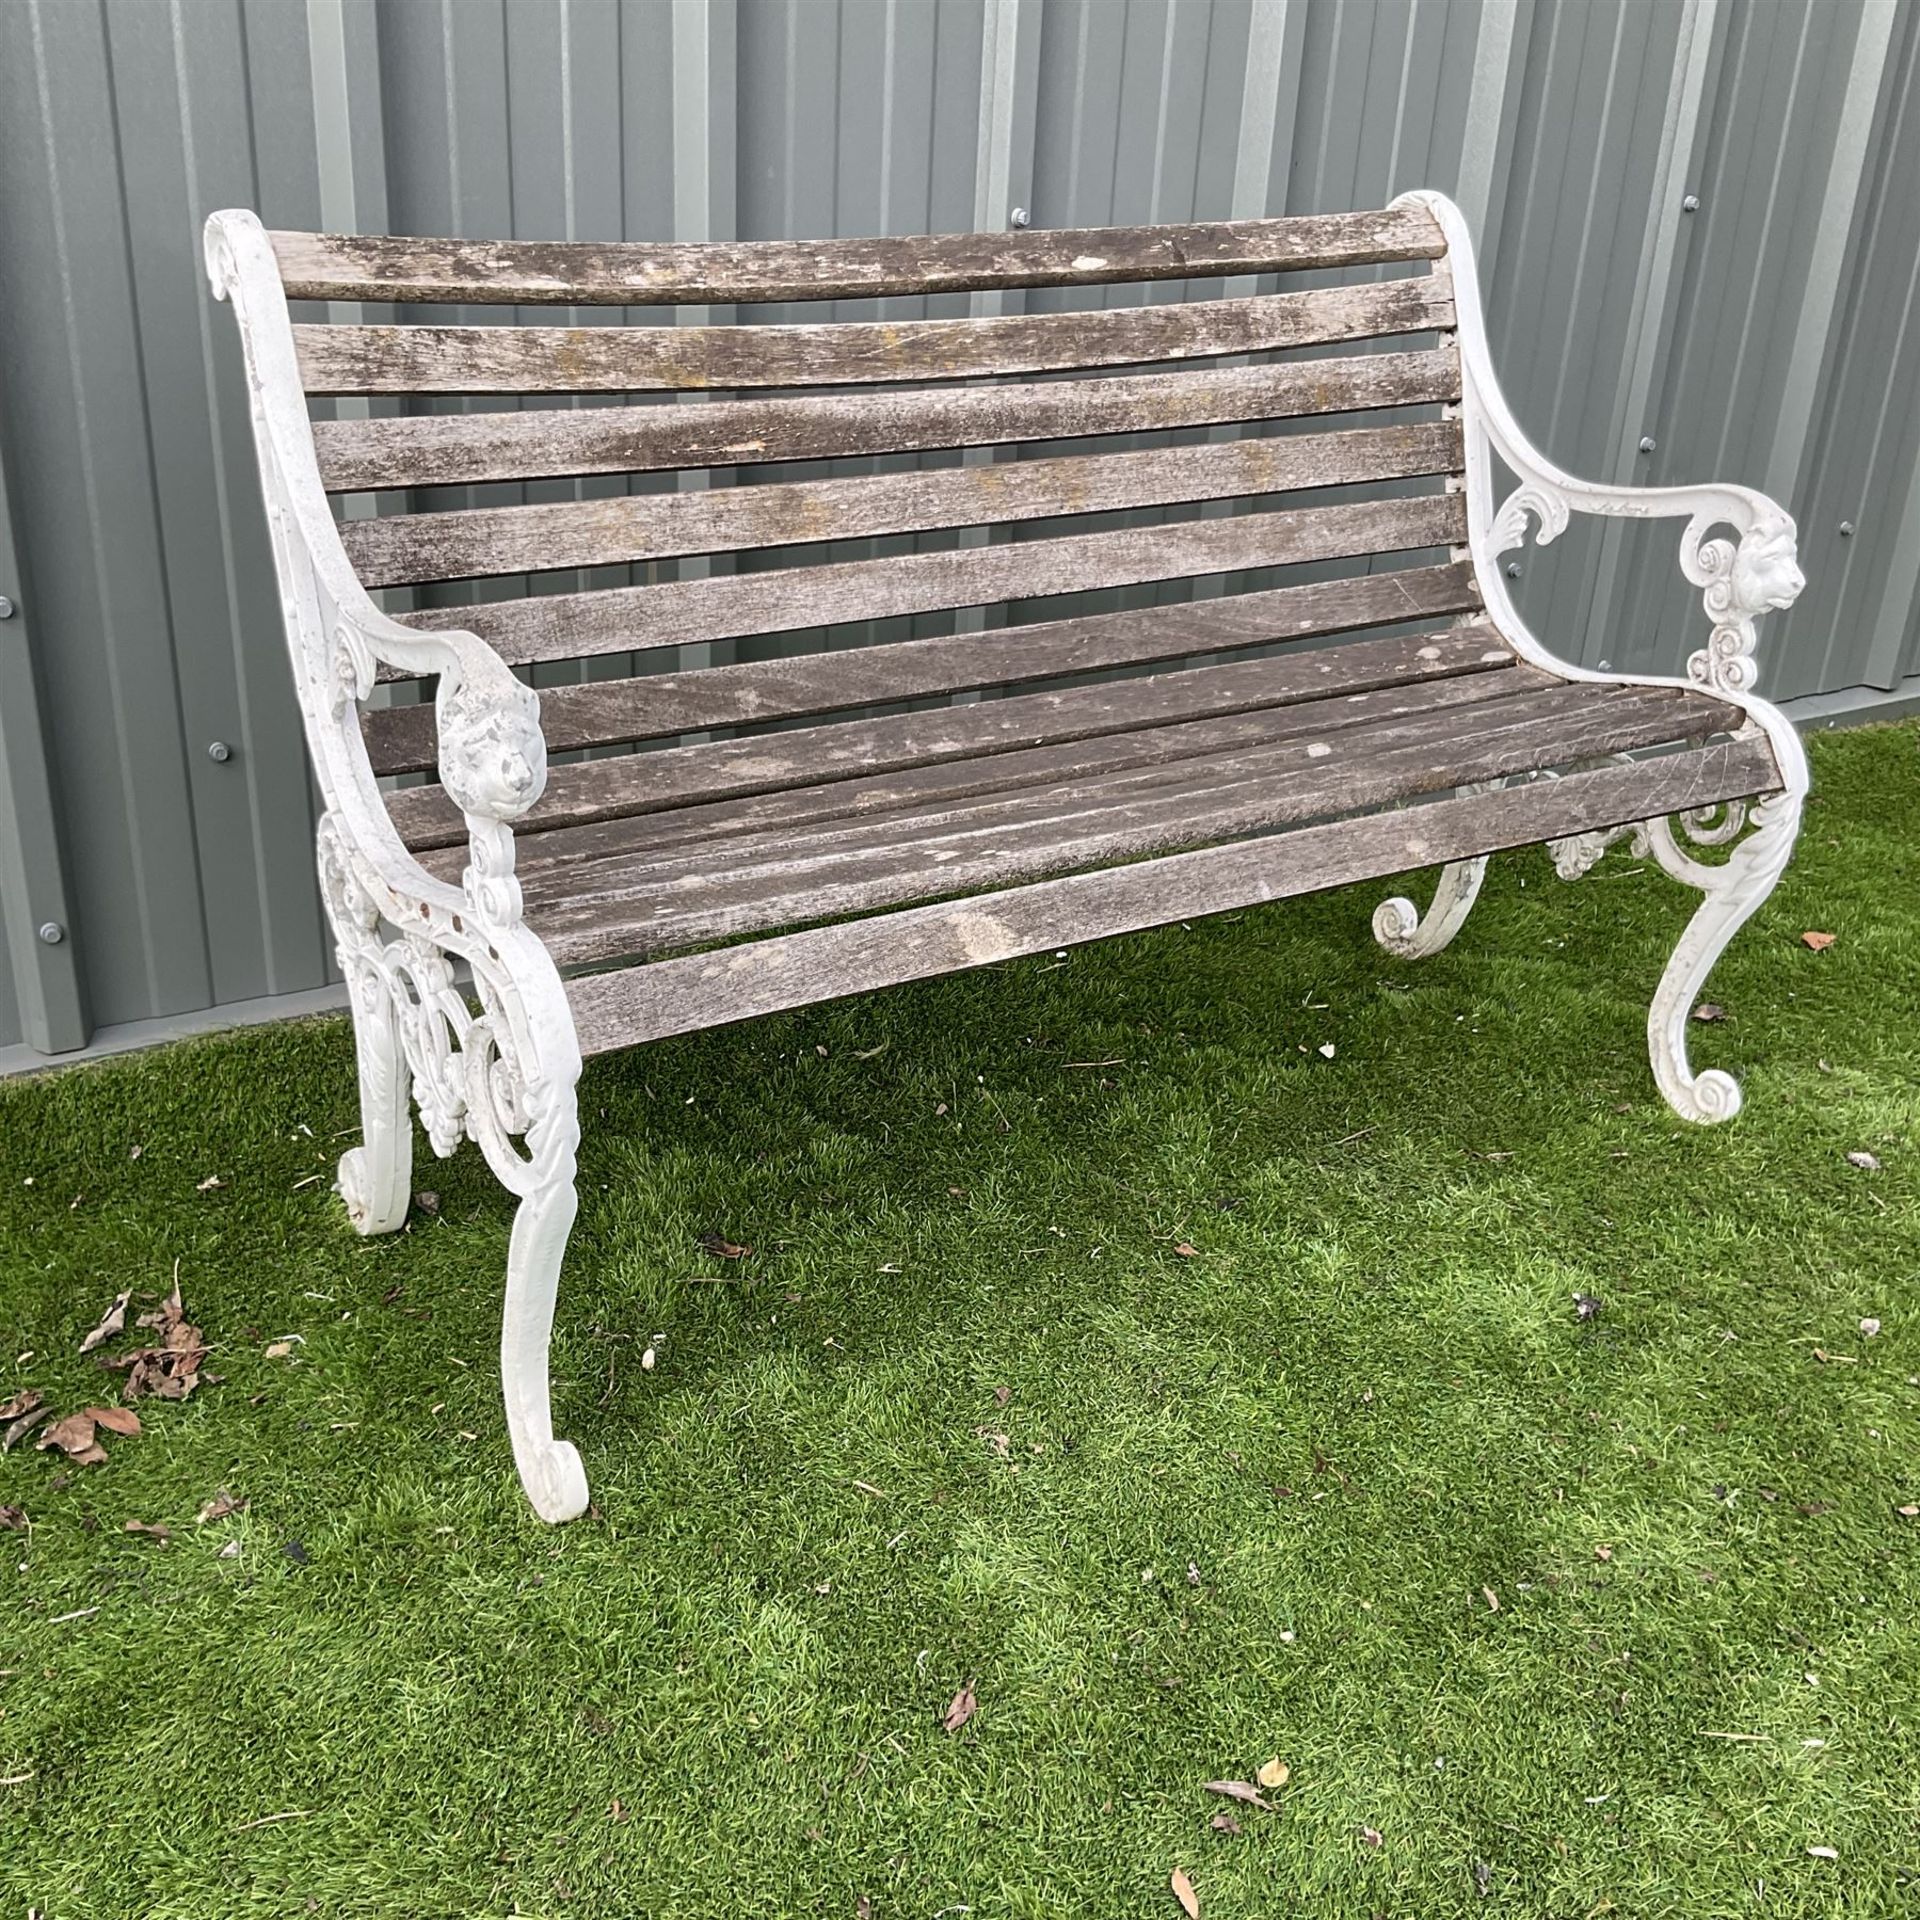 Cast aluminium and wood slatted garden bench painted in white - THIS LOT IS TO BE COLLECTED BY APPO - Image 2 of 4